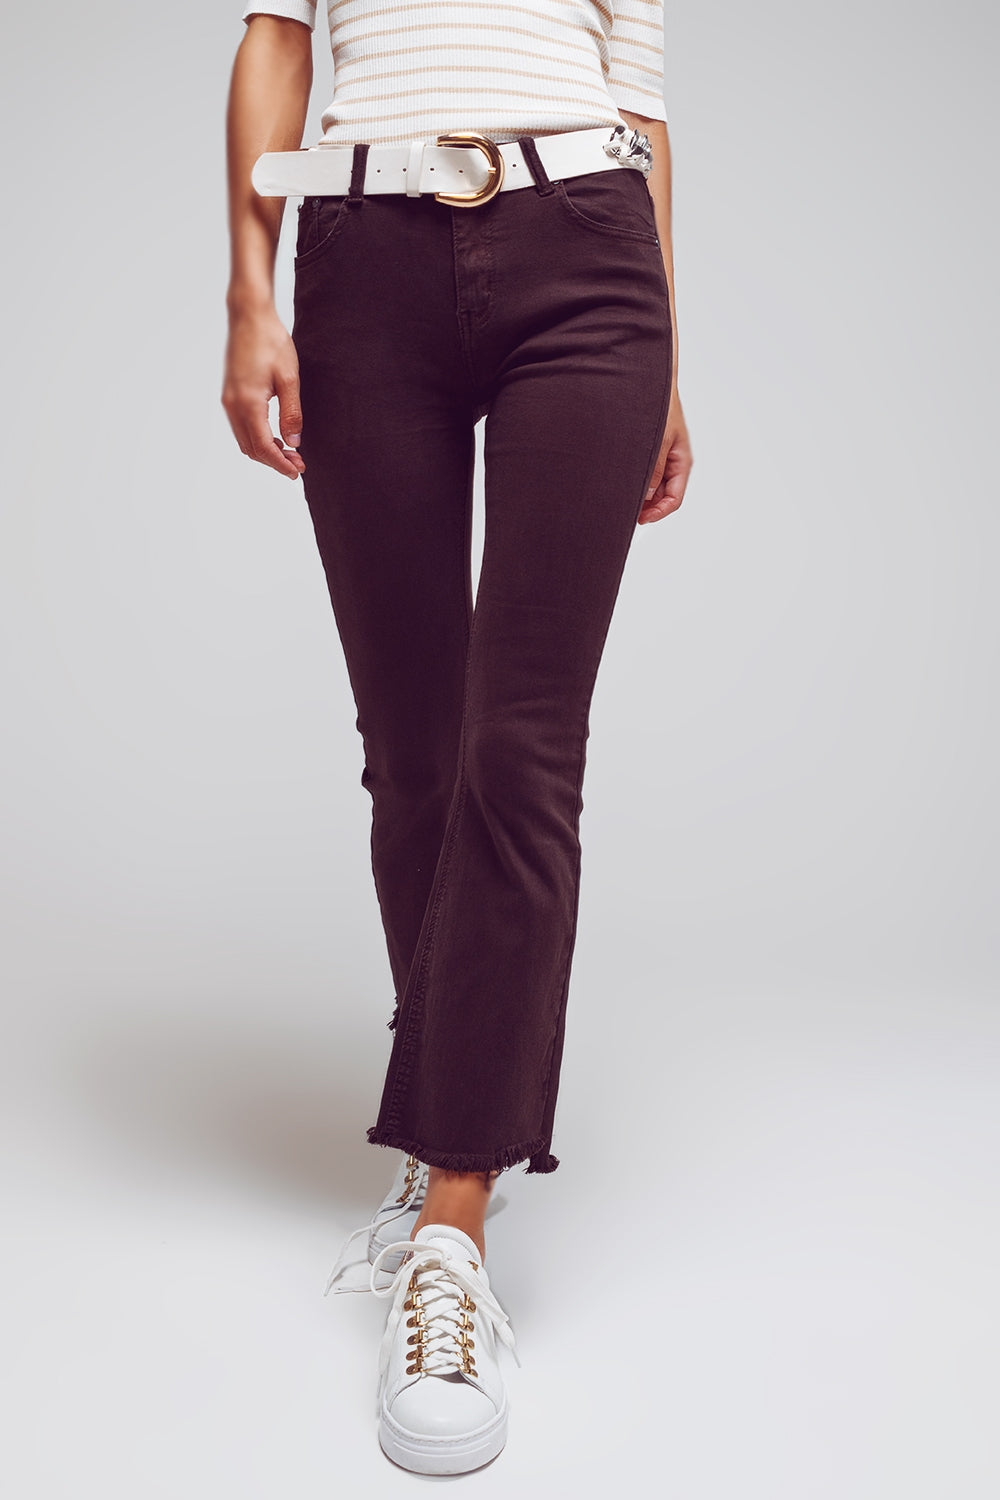 Flare jeans with raw hem edge in brown - Szua Store